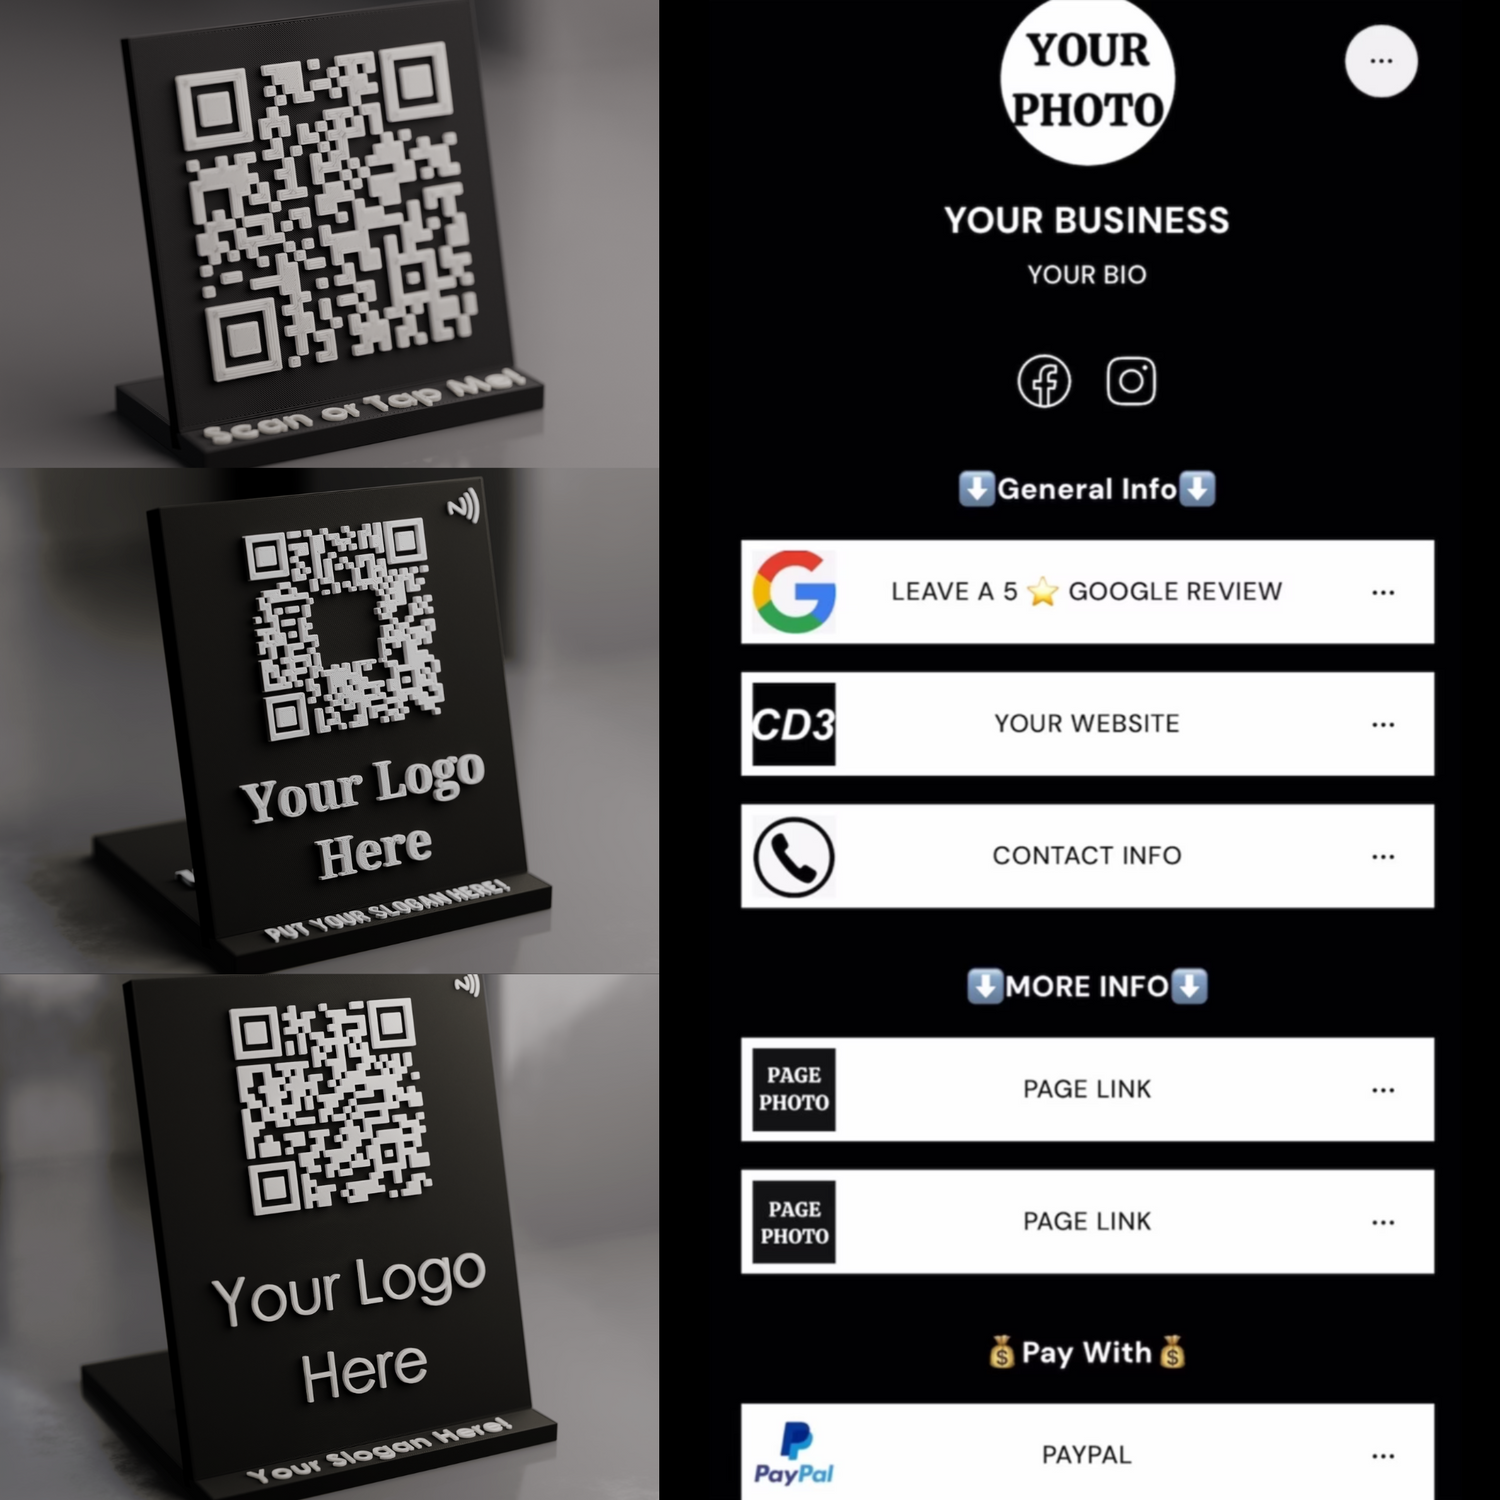 Example of linktree we will make if you choose the 2 link of 3+ link option of 10 Mini Qr Code Stands with NFC Chip - Get google reviews, boost website traffic, advertise social medias, and market your brand better.